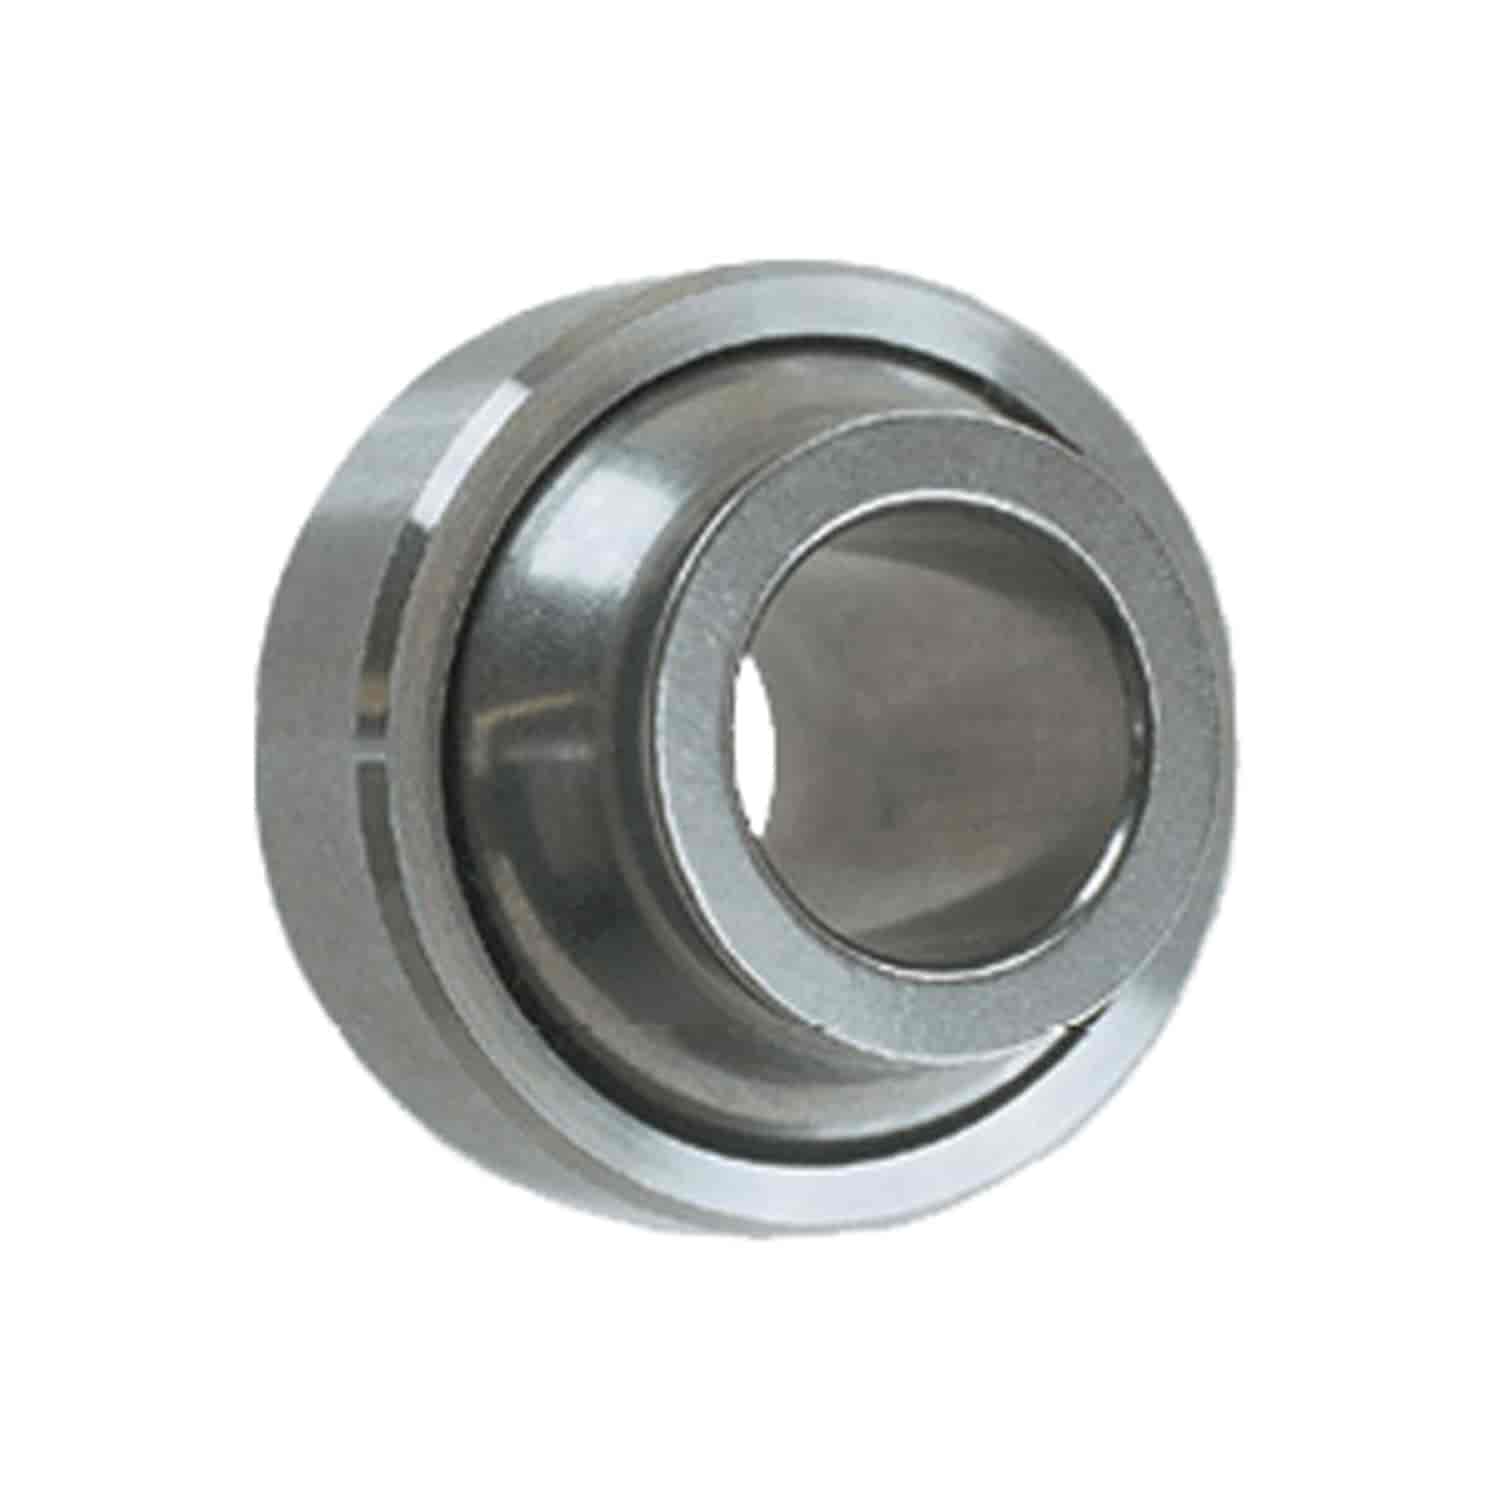 High Misalignment 440C SS Shperical Bearing Hole Size: 0.50"